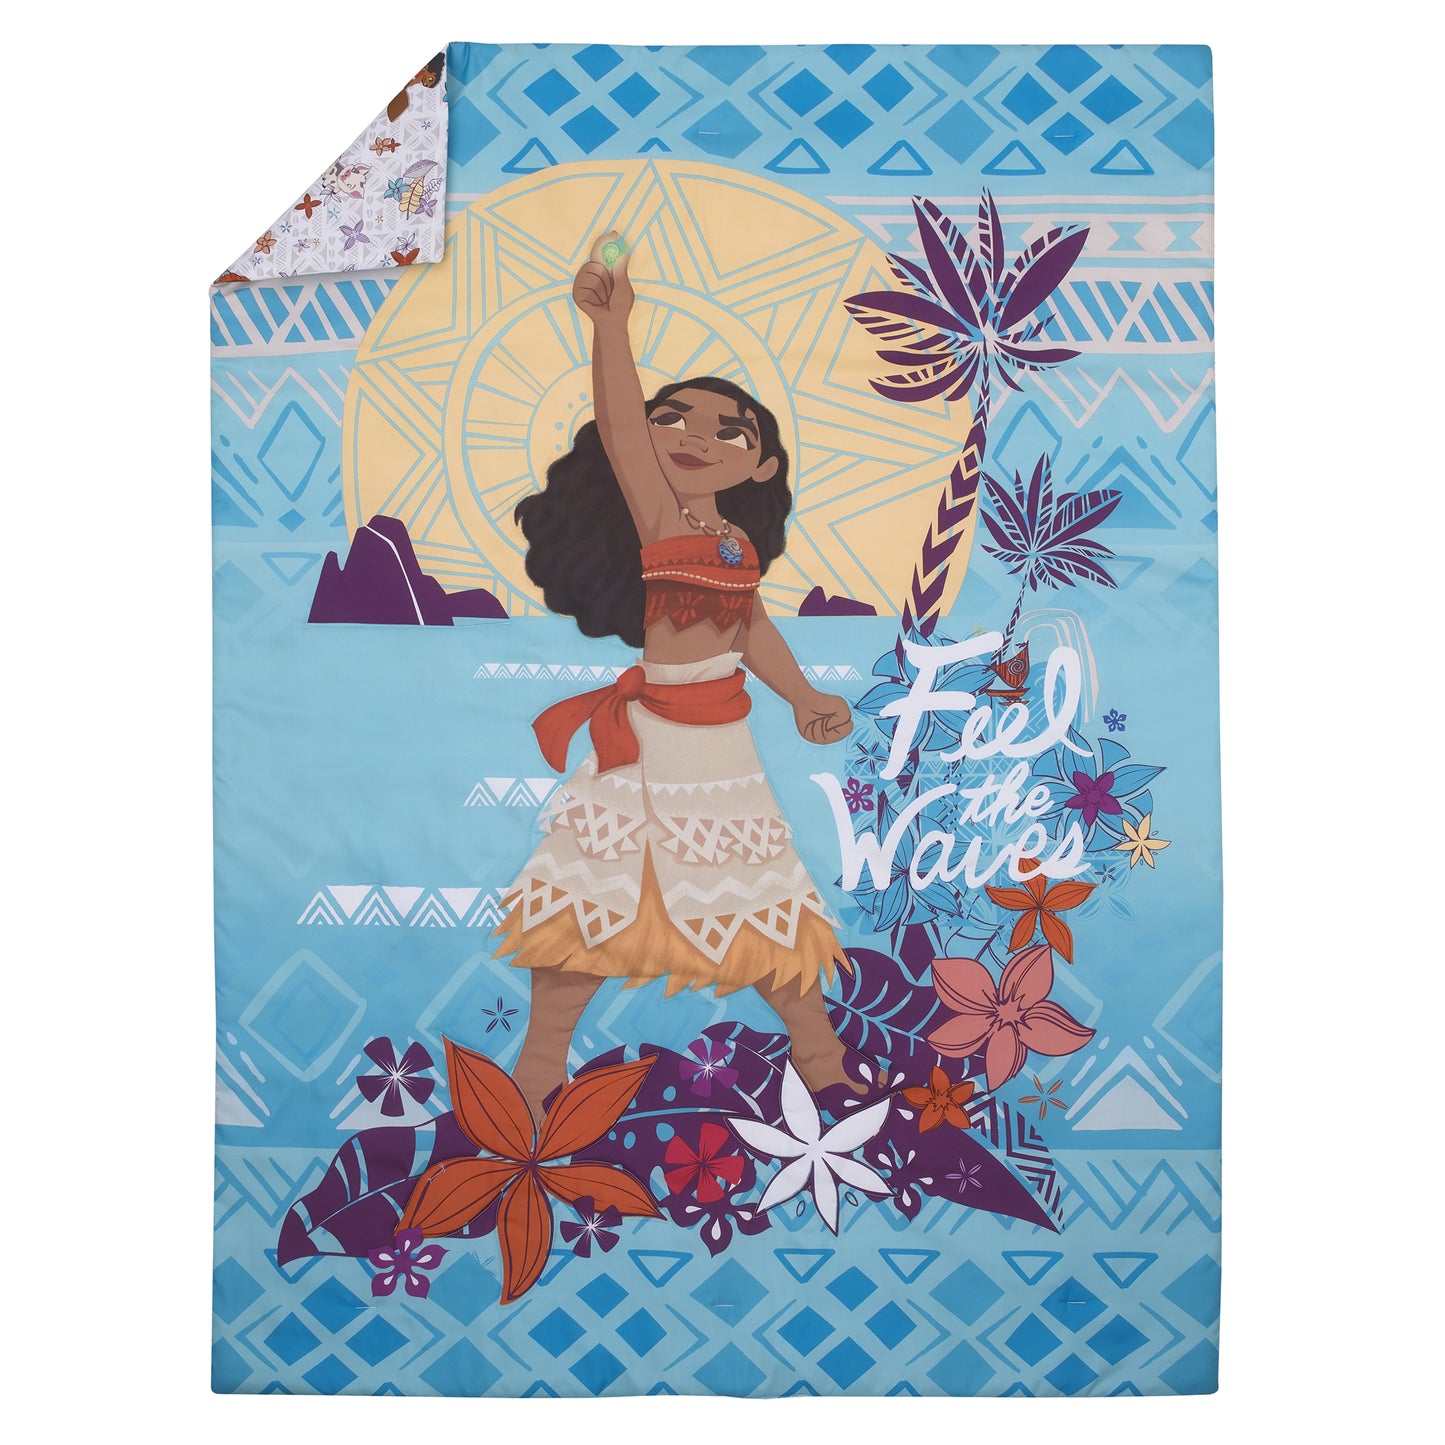 Disney Moana Free as the Ocean Aqua, Purple, Orange and White Tropical 4 Piece Toddler Bed Set - Comforter, Fitted Bottom Sheet, Flat Top Sheet, and Reversible Pillowcase